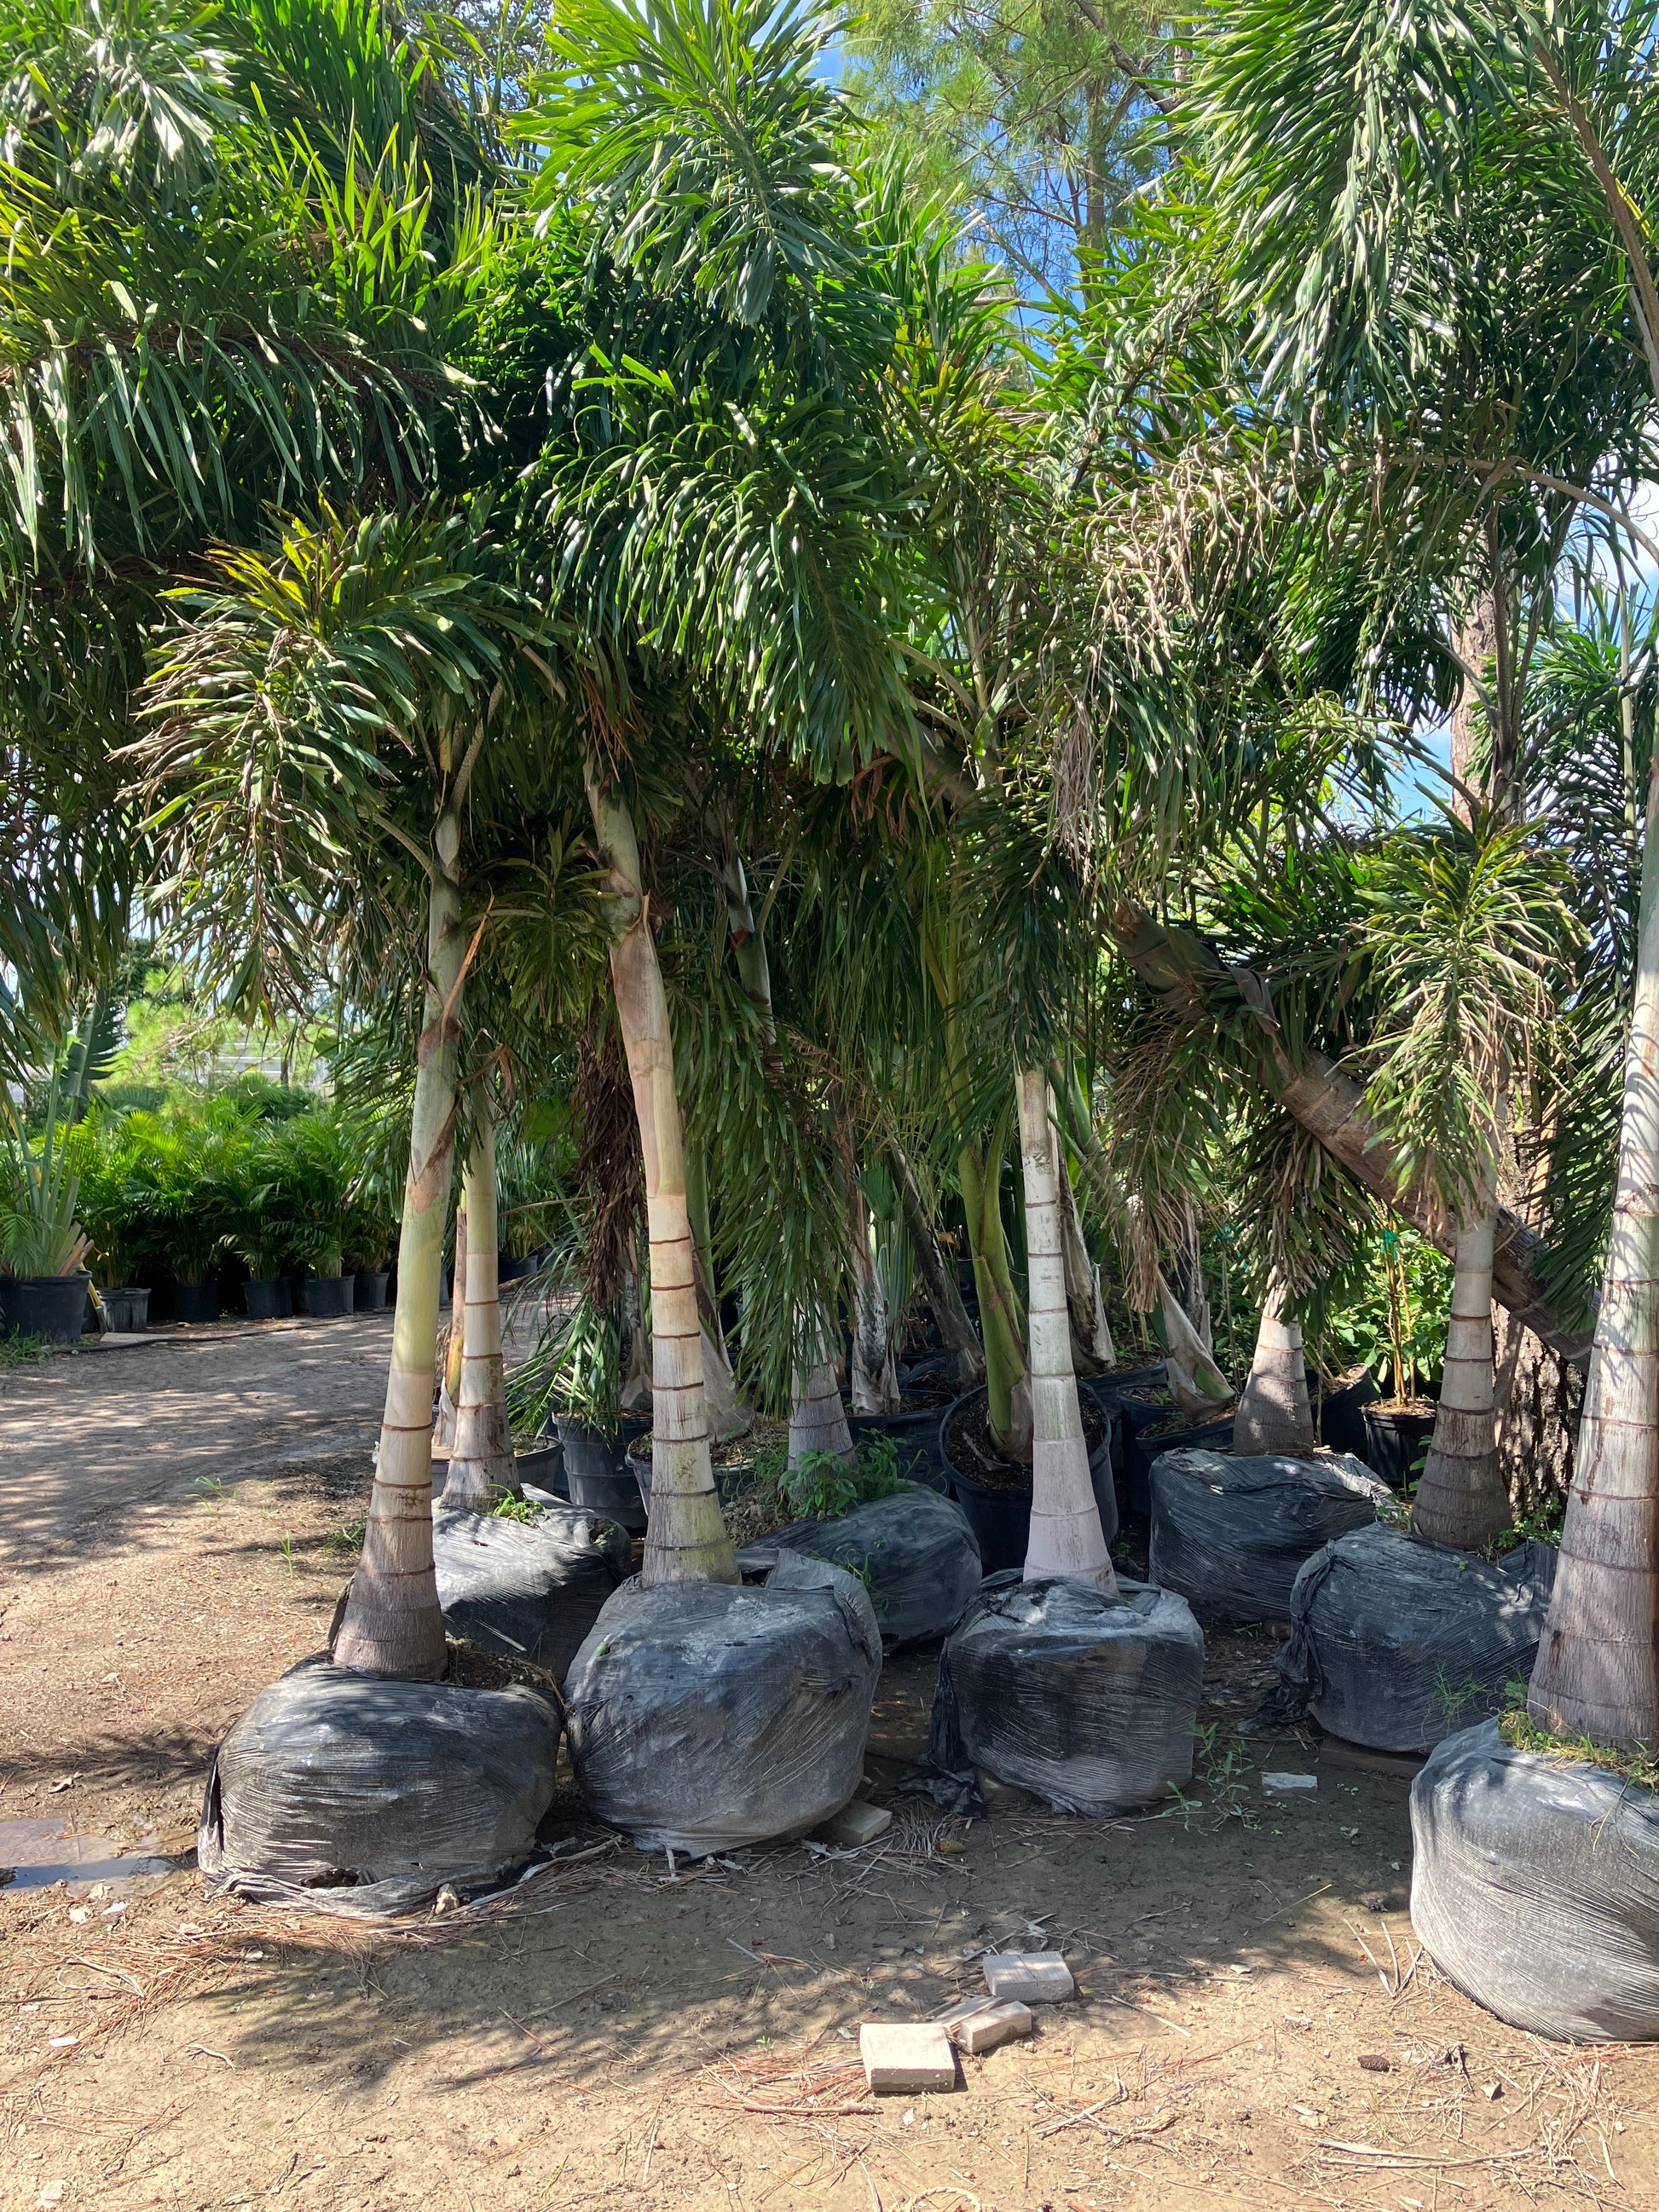 Foxtail B&B foxtail palm - How to choose the correct size Foxtail palm, height, width, and number of trunks are important to your landscaping project